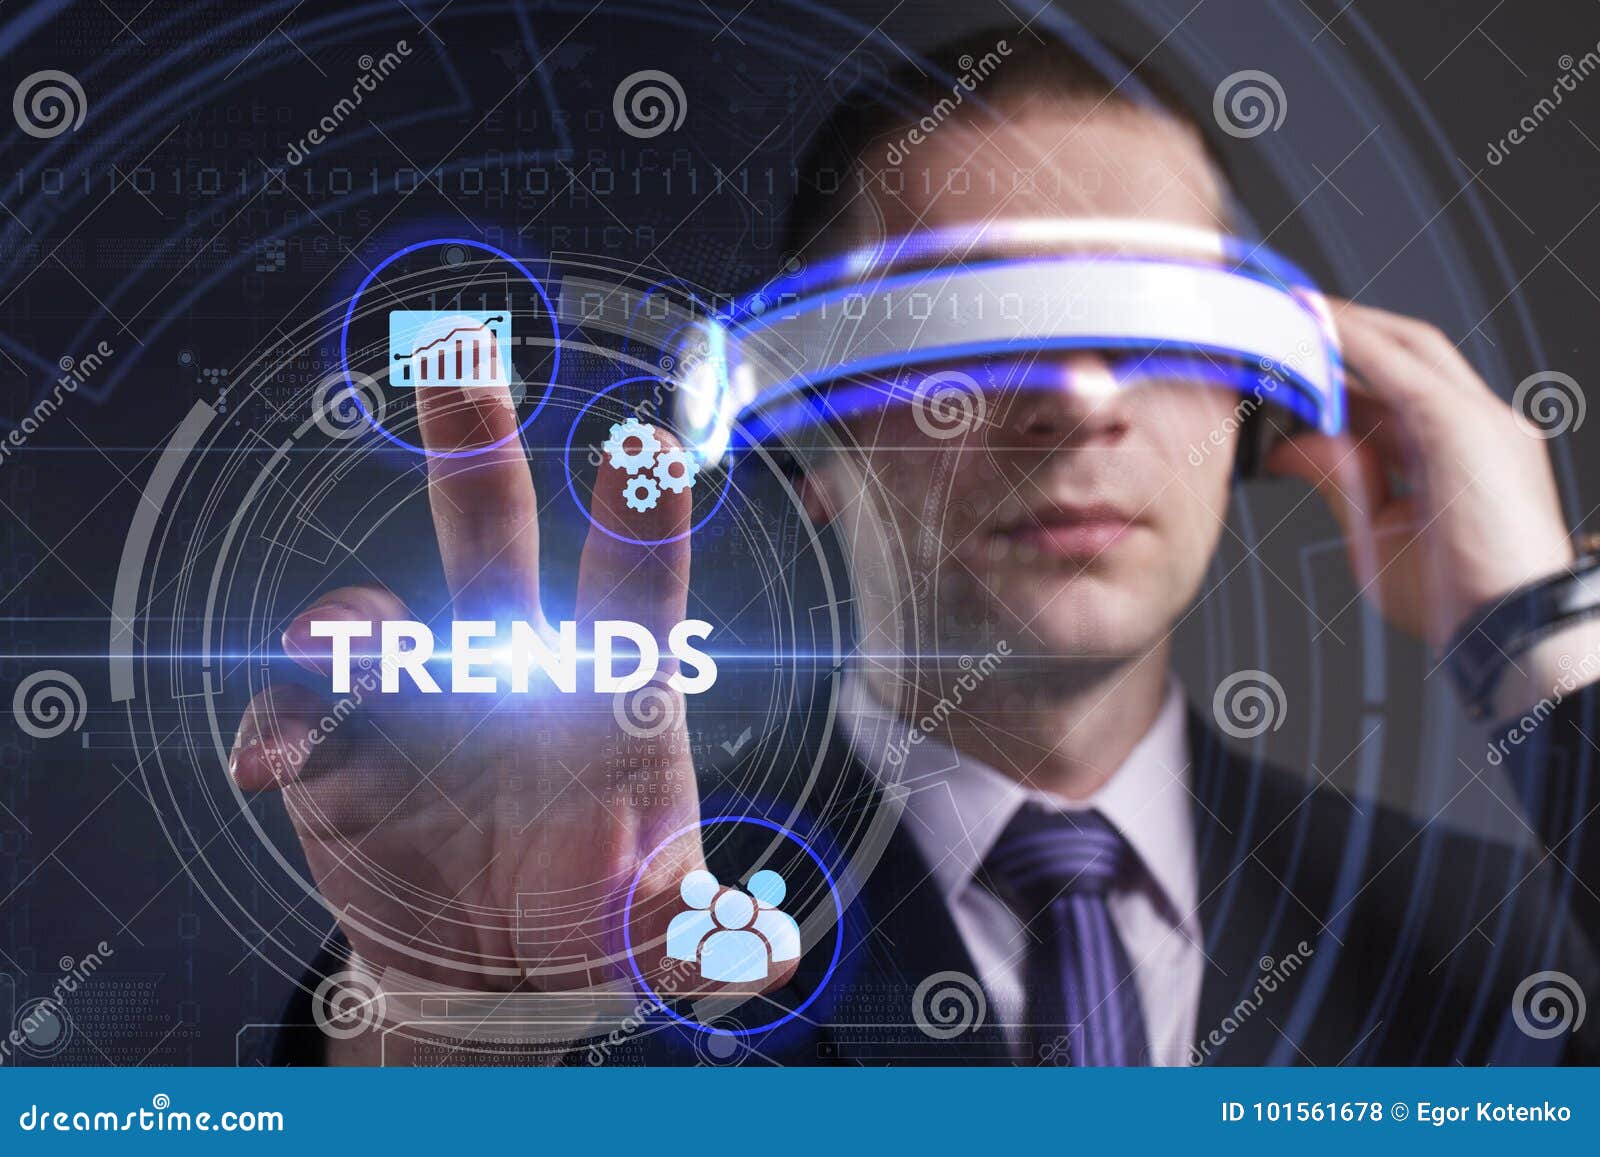 business, technology, internet and network concept. young businessman working in virtual reality glasses sees the inscription: tr